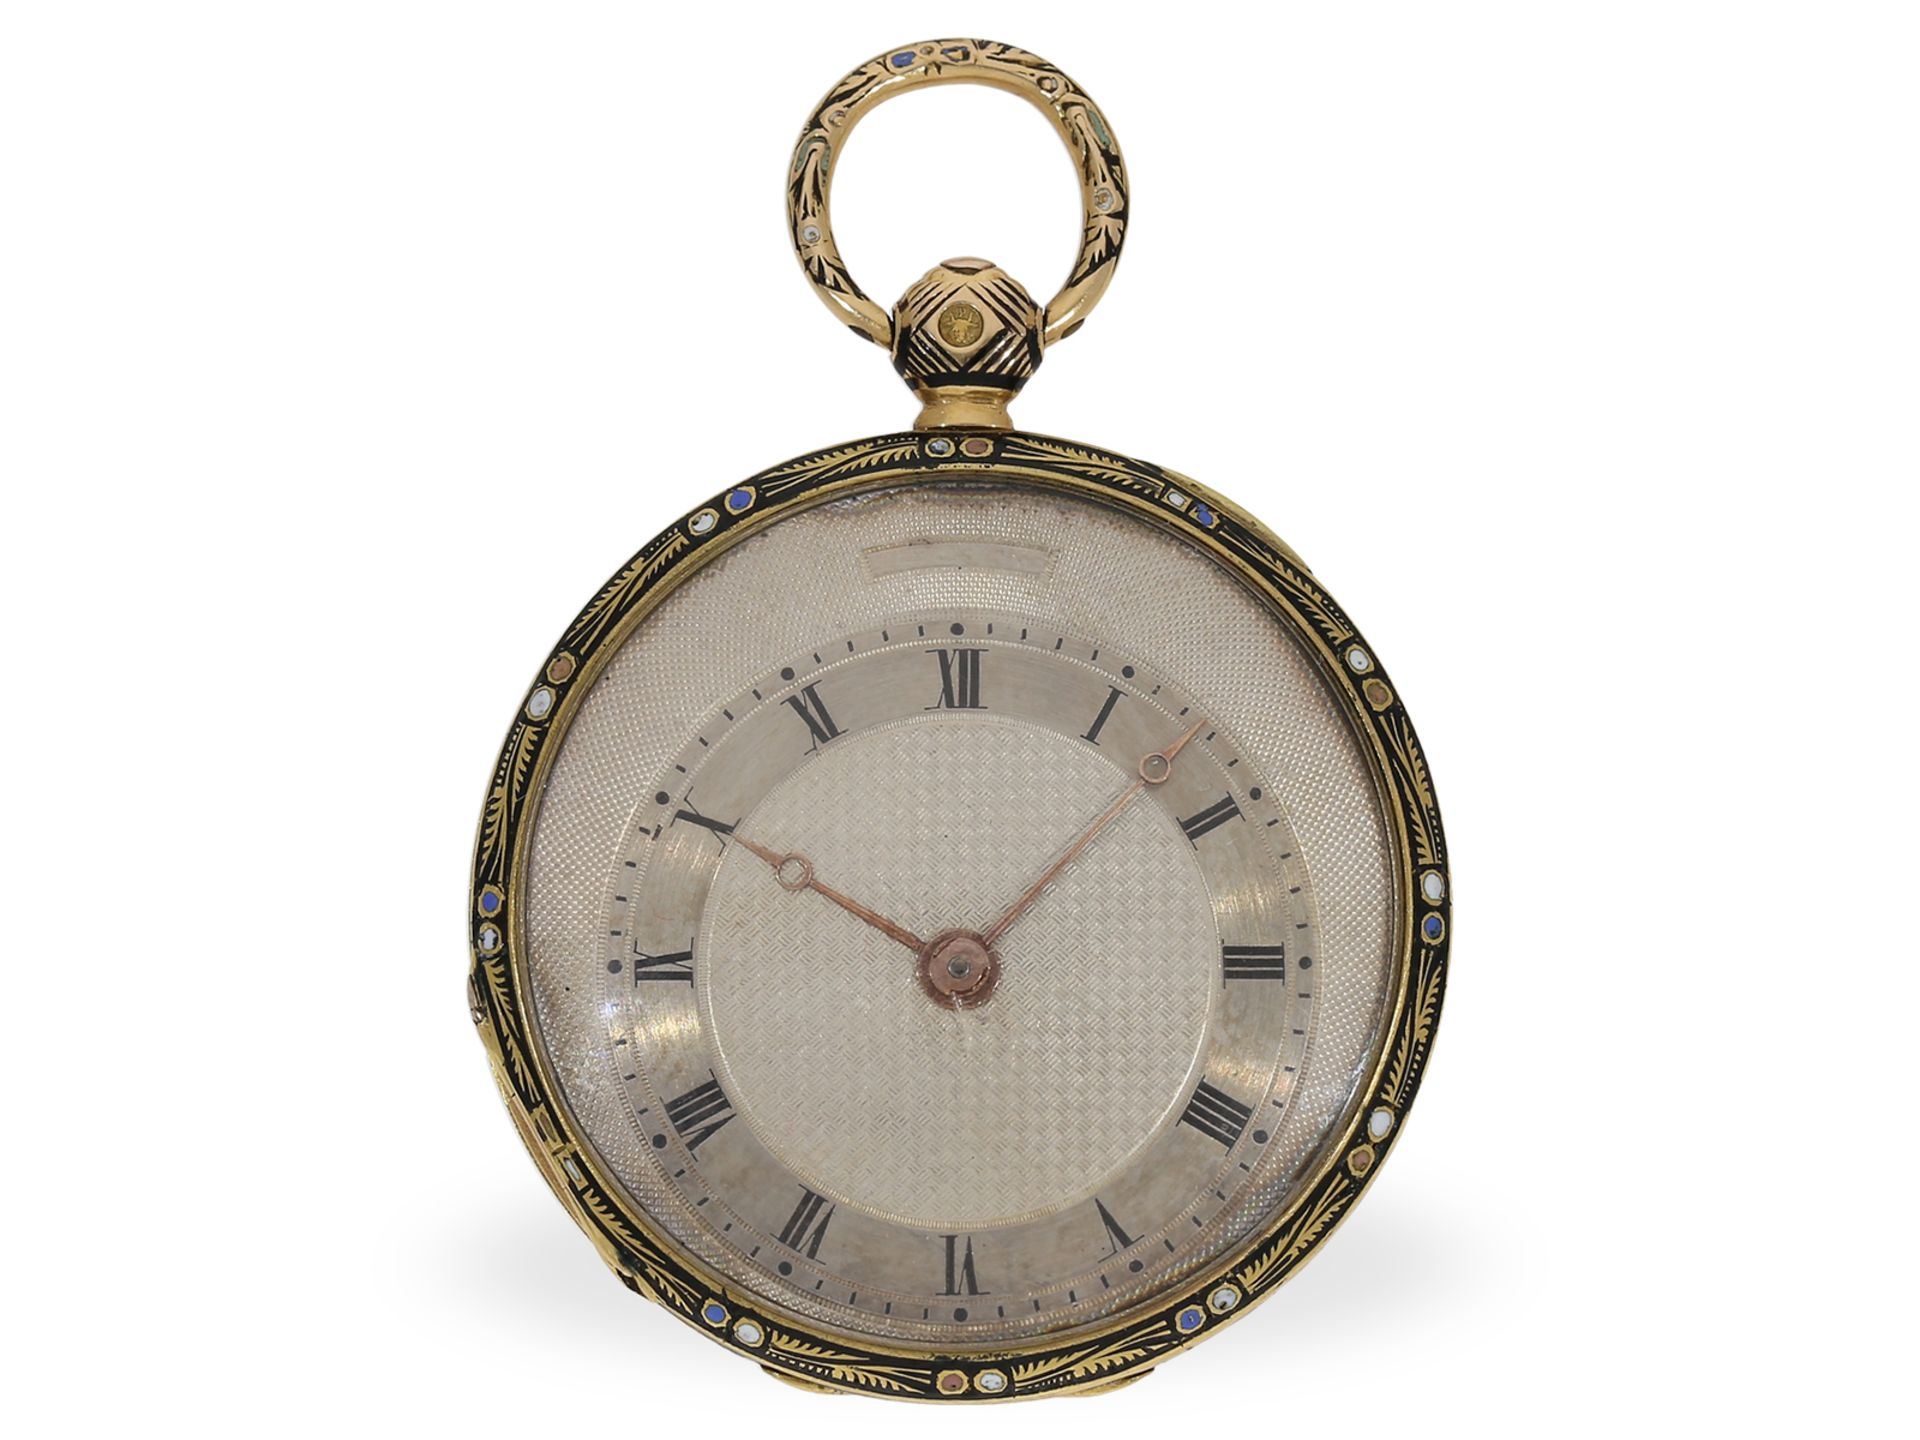 Pocket watch: excellently preserved gold/enamel lepine with decentral dial, ca. 1820 - Image 2 of 4